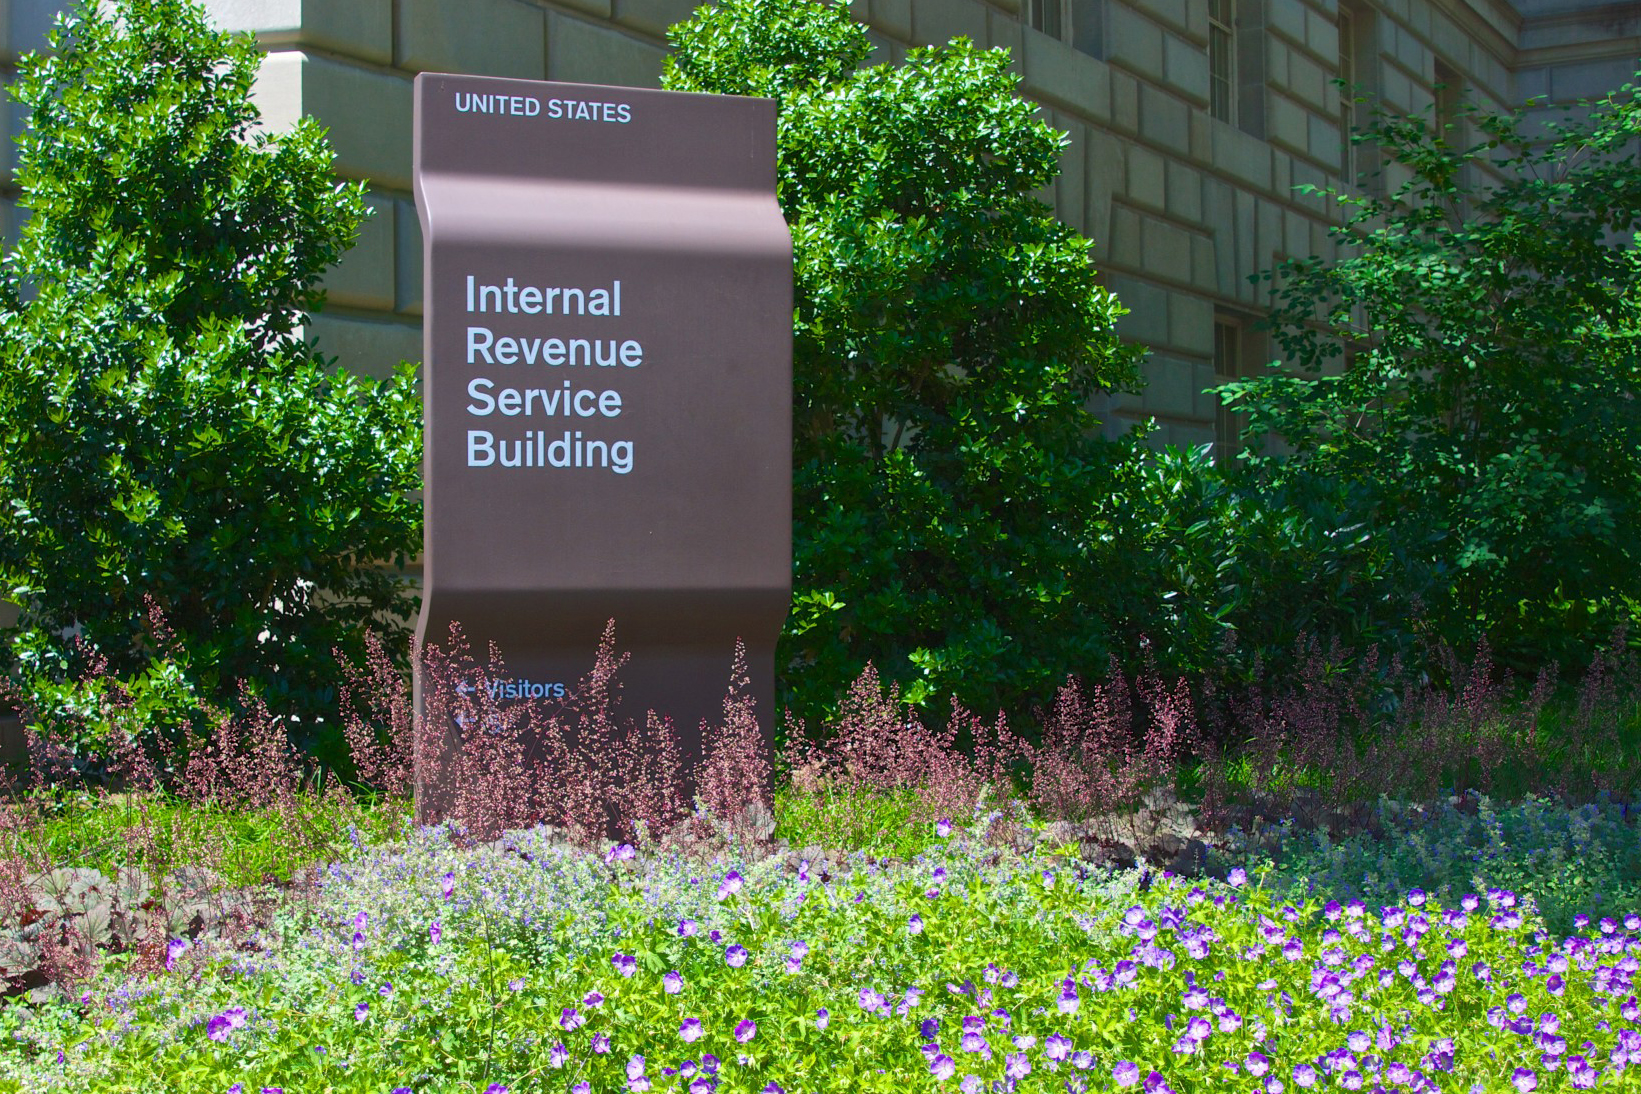 A sign outside an IRS (internal revenue service) building.